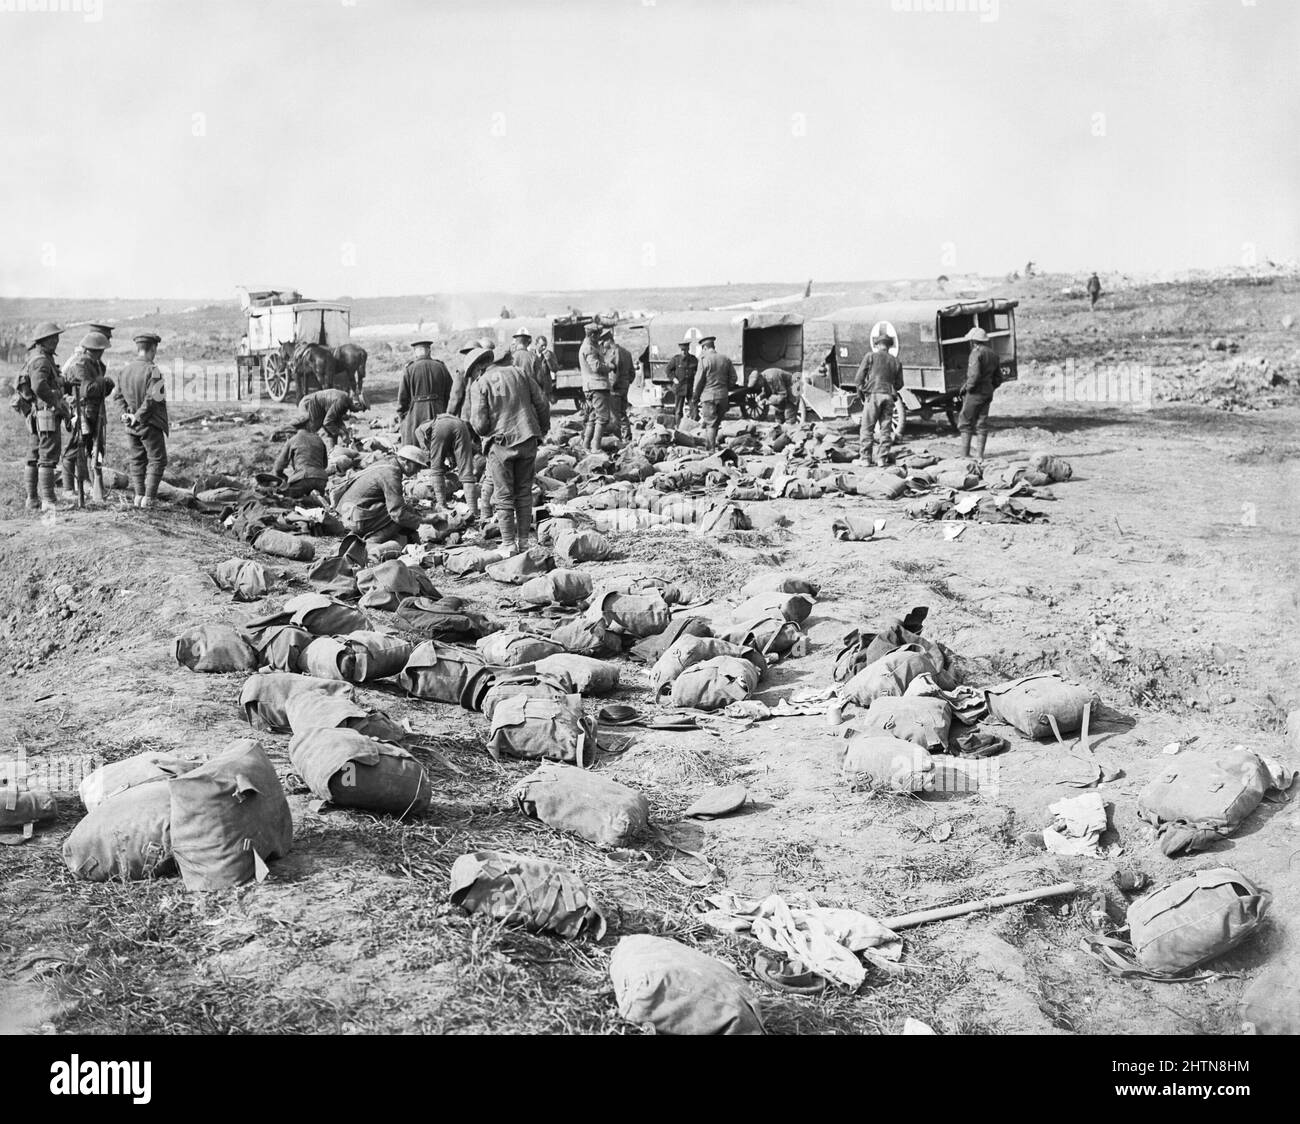 The Battle of Guillemont. 3 -5 September 1916. Troops of RAMC (Royal Army Medical Corps) search the packs of the dead for letters and effects to be sent to relatives after the Battle of Guillemont (3-5 Sept 1916) during The Battle of the Somme. Horse and motor ambulances in the background. Stock Photo